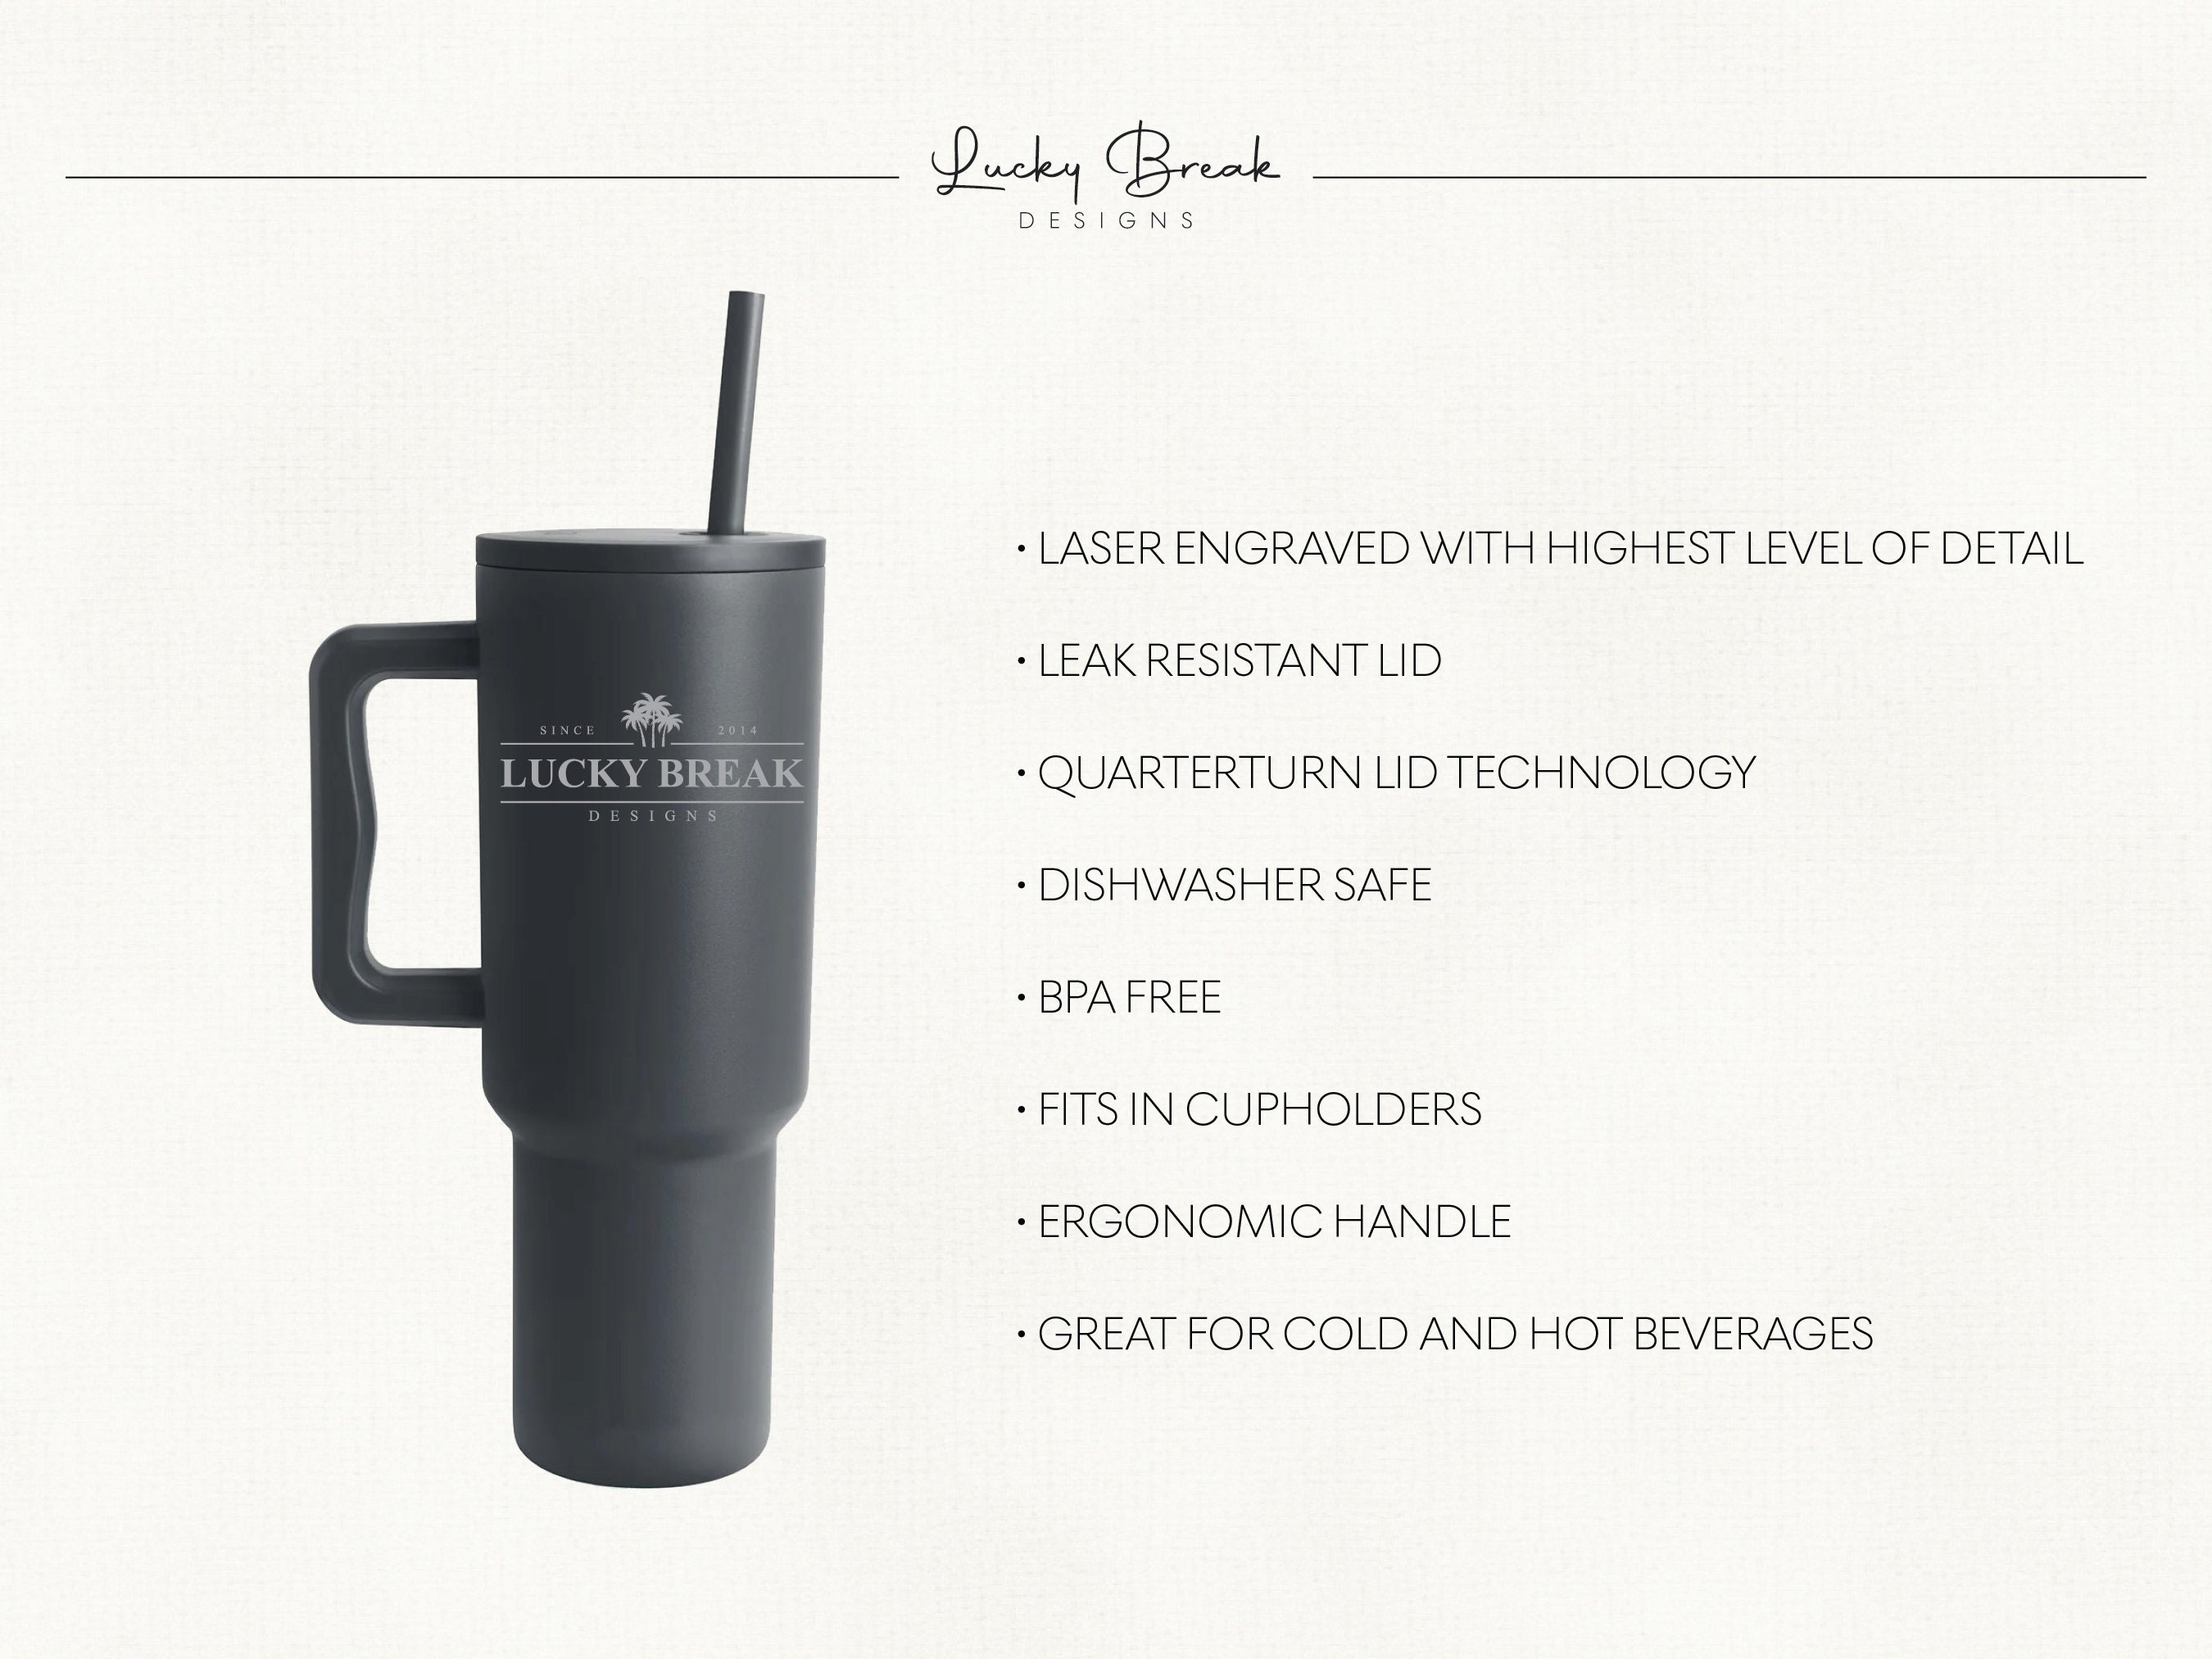 Modern Personalized Name 16oz Stainless Steel Mug, Design: S4